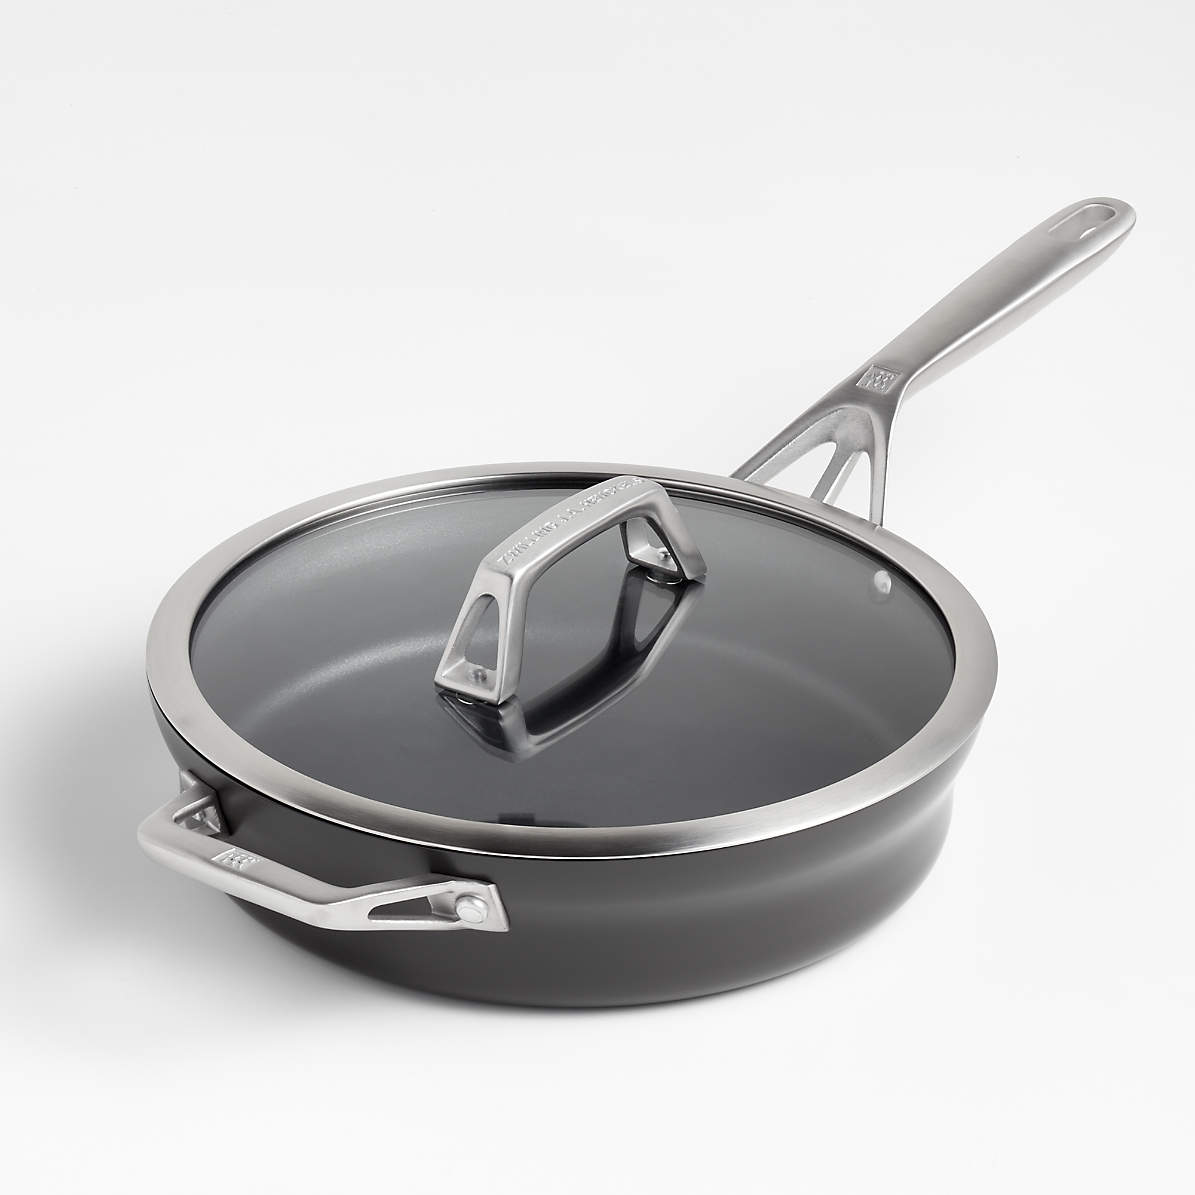 https://cb.scene7.com/is/image/Crate/ZwillingMtn3qNSHASauteWLSSS21/$web_pdp_main_carousel_zoom_med$/210525163557/zwilling-motion-3-qt.-non-stick-hard-anodized-saute-pan-with-lid.jpg